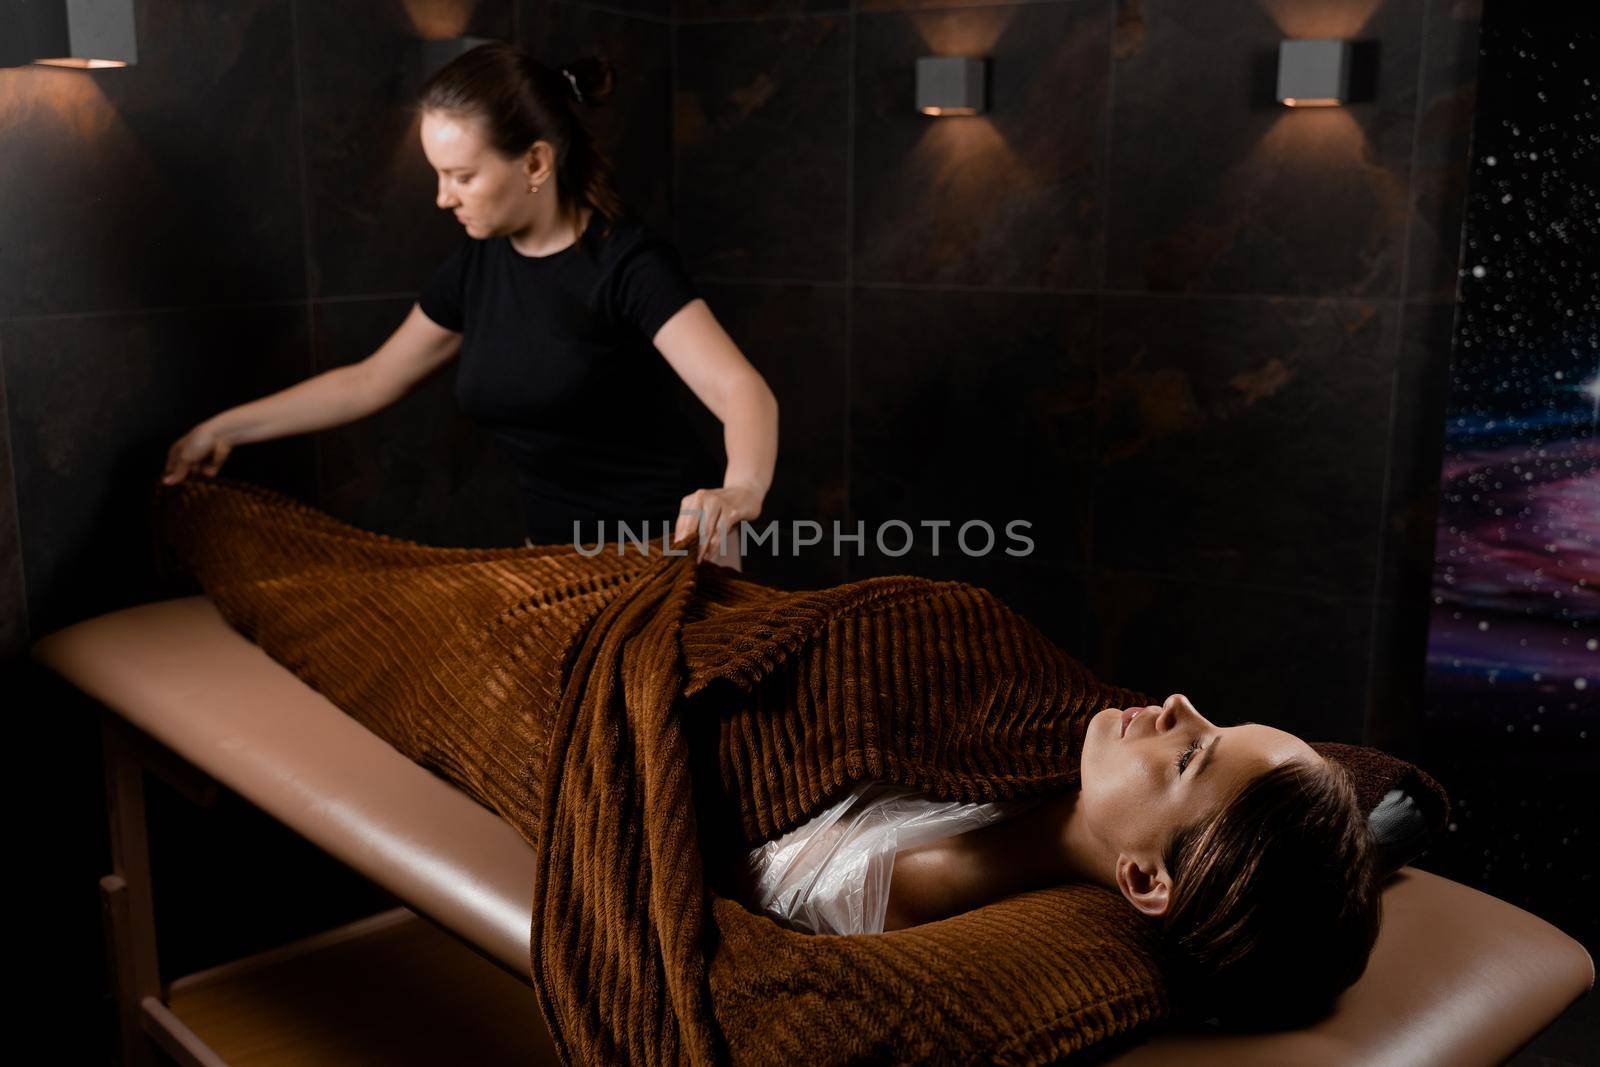 Full body wrap in warm blanket after chocolate massage beauty treatment for female model in spa